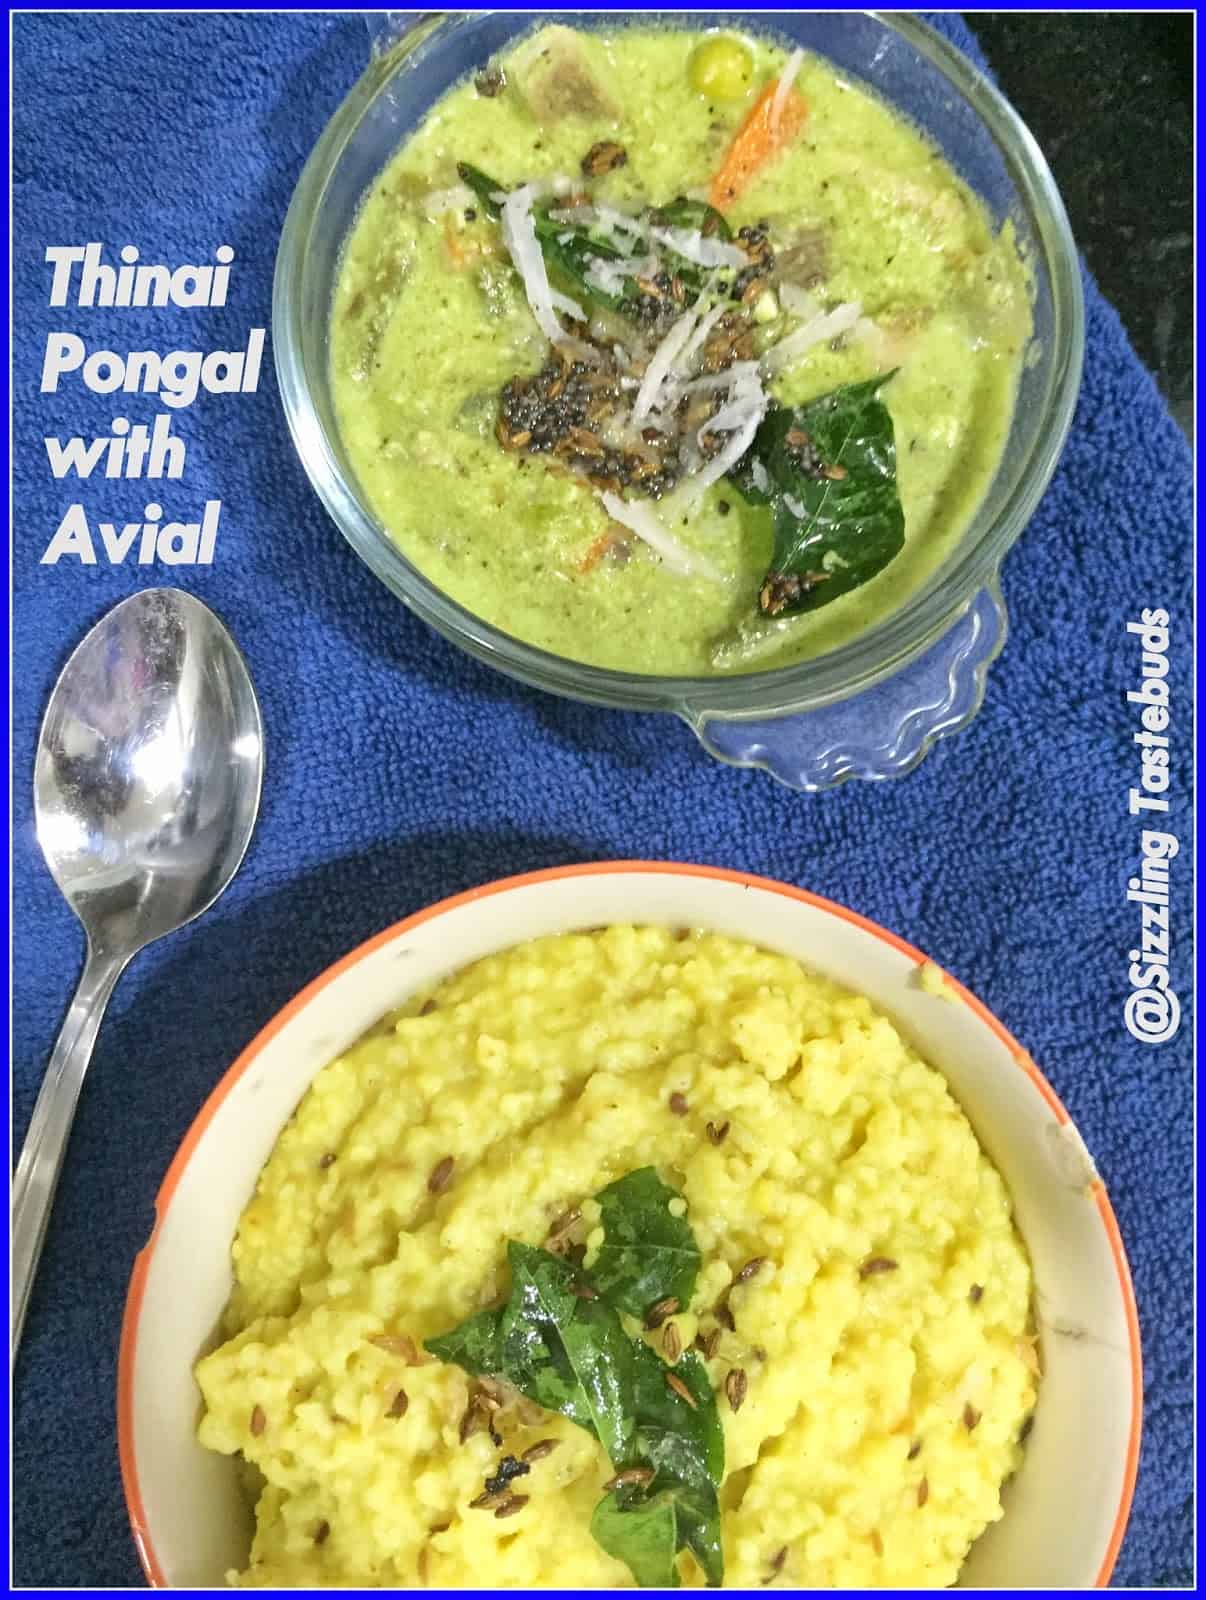 Thinai Pongal or Foxtail millet is a nutritious one pot meal made with foxtail millet and lentils. Makes for a hearty breakfast or brunch option, and is served with chutney and sambar